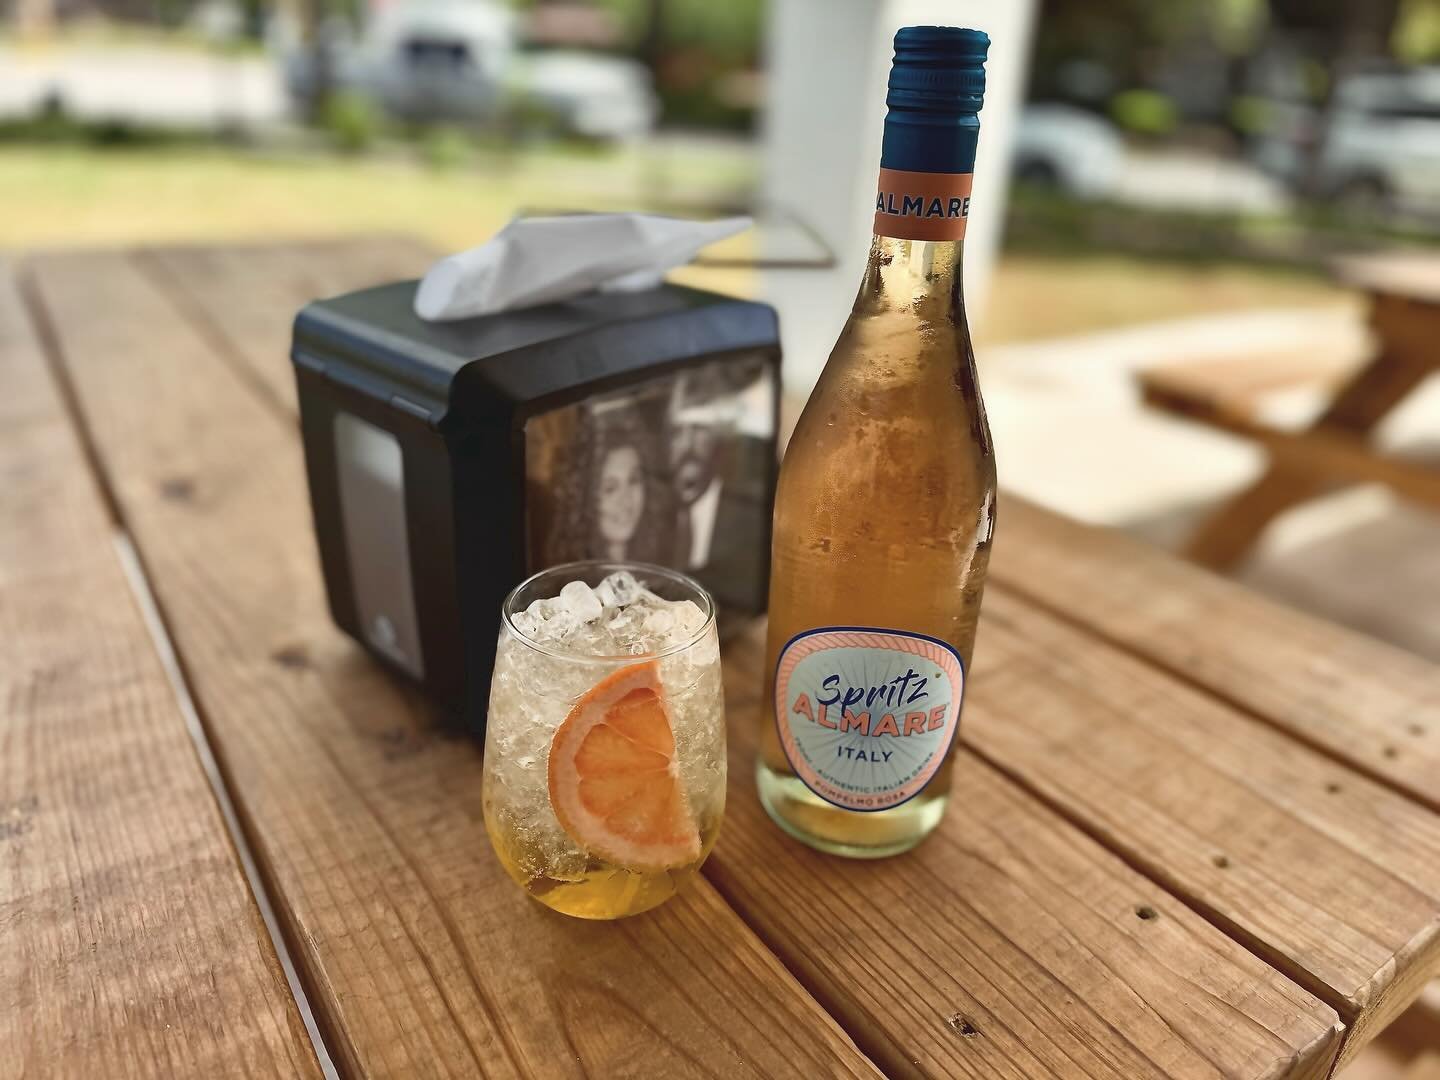 If you have followed Cenzo&rsquo;s over the years🤷&zwj;♂️ you know that the 3rd week of April is always SPRITZ WEEK🤷&zwj;♂️🤷&zwj;♂️. All week long bottles of Spritz are 25% off!

#spritz #nojudgementdaydrinking #specials #happyhour #oakcliff #dall